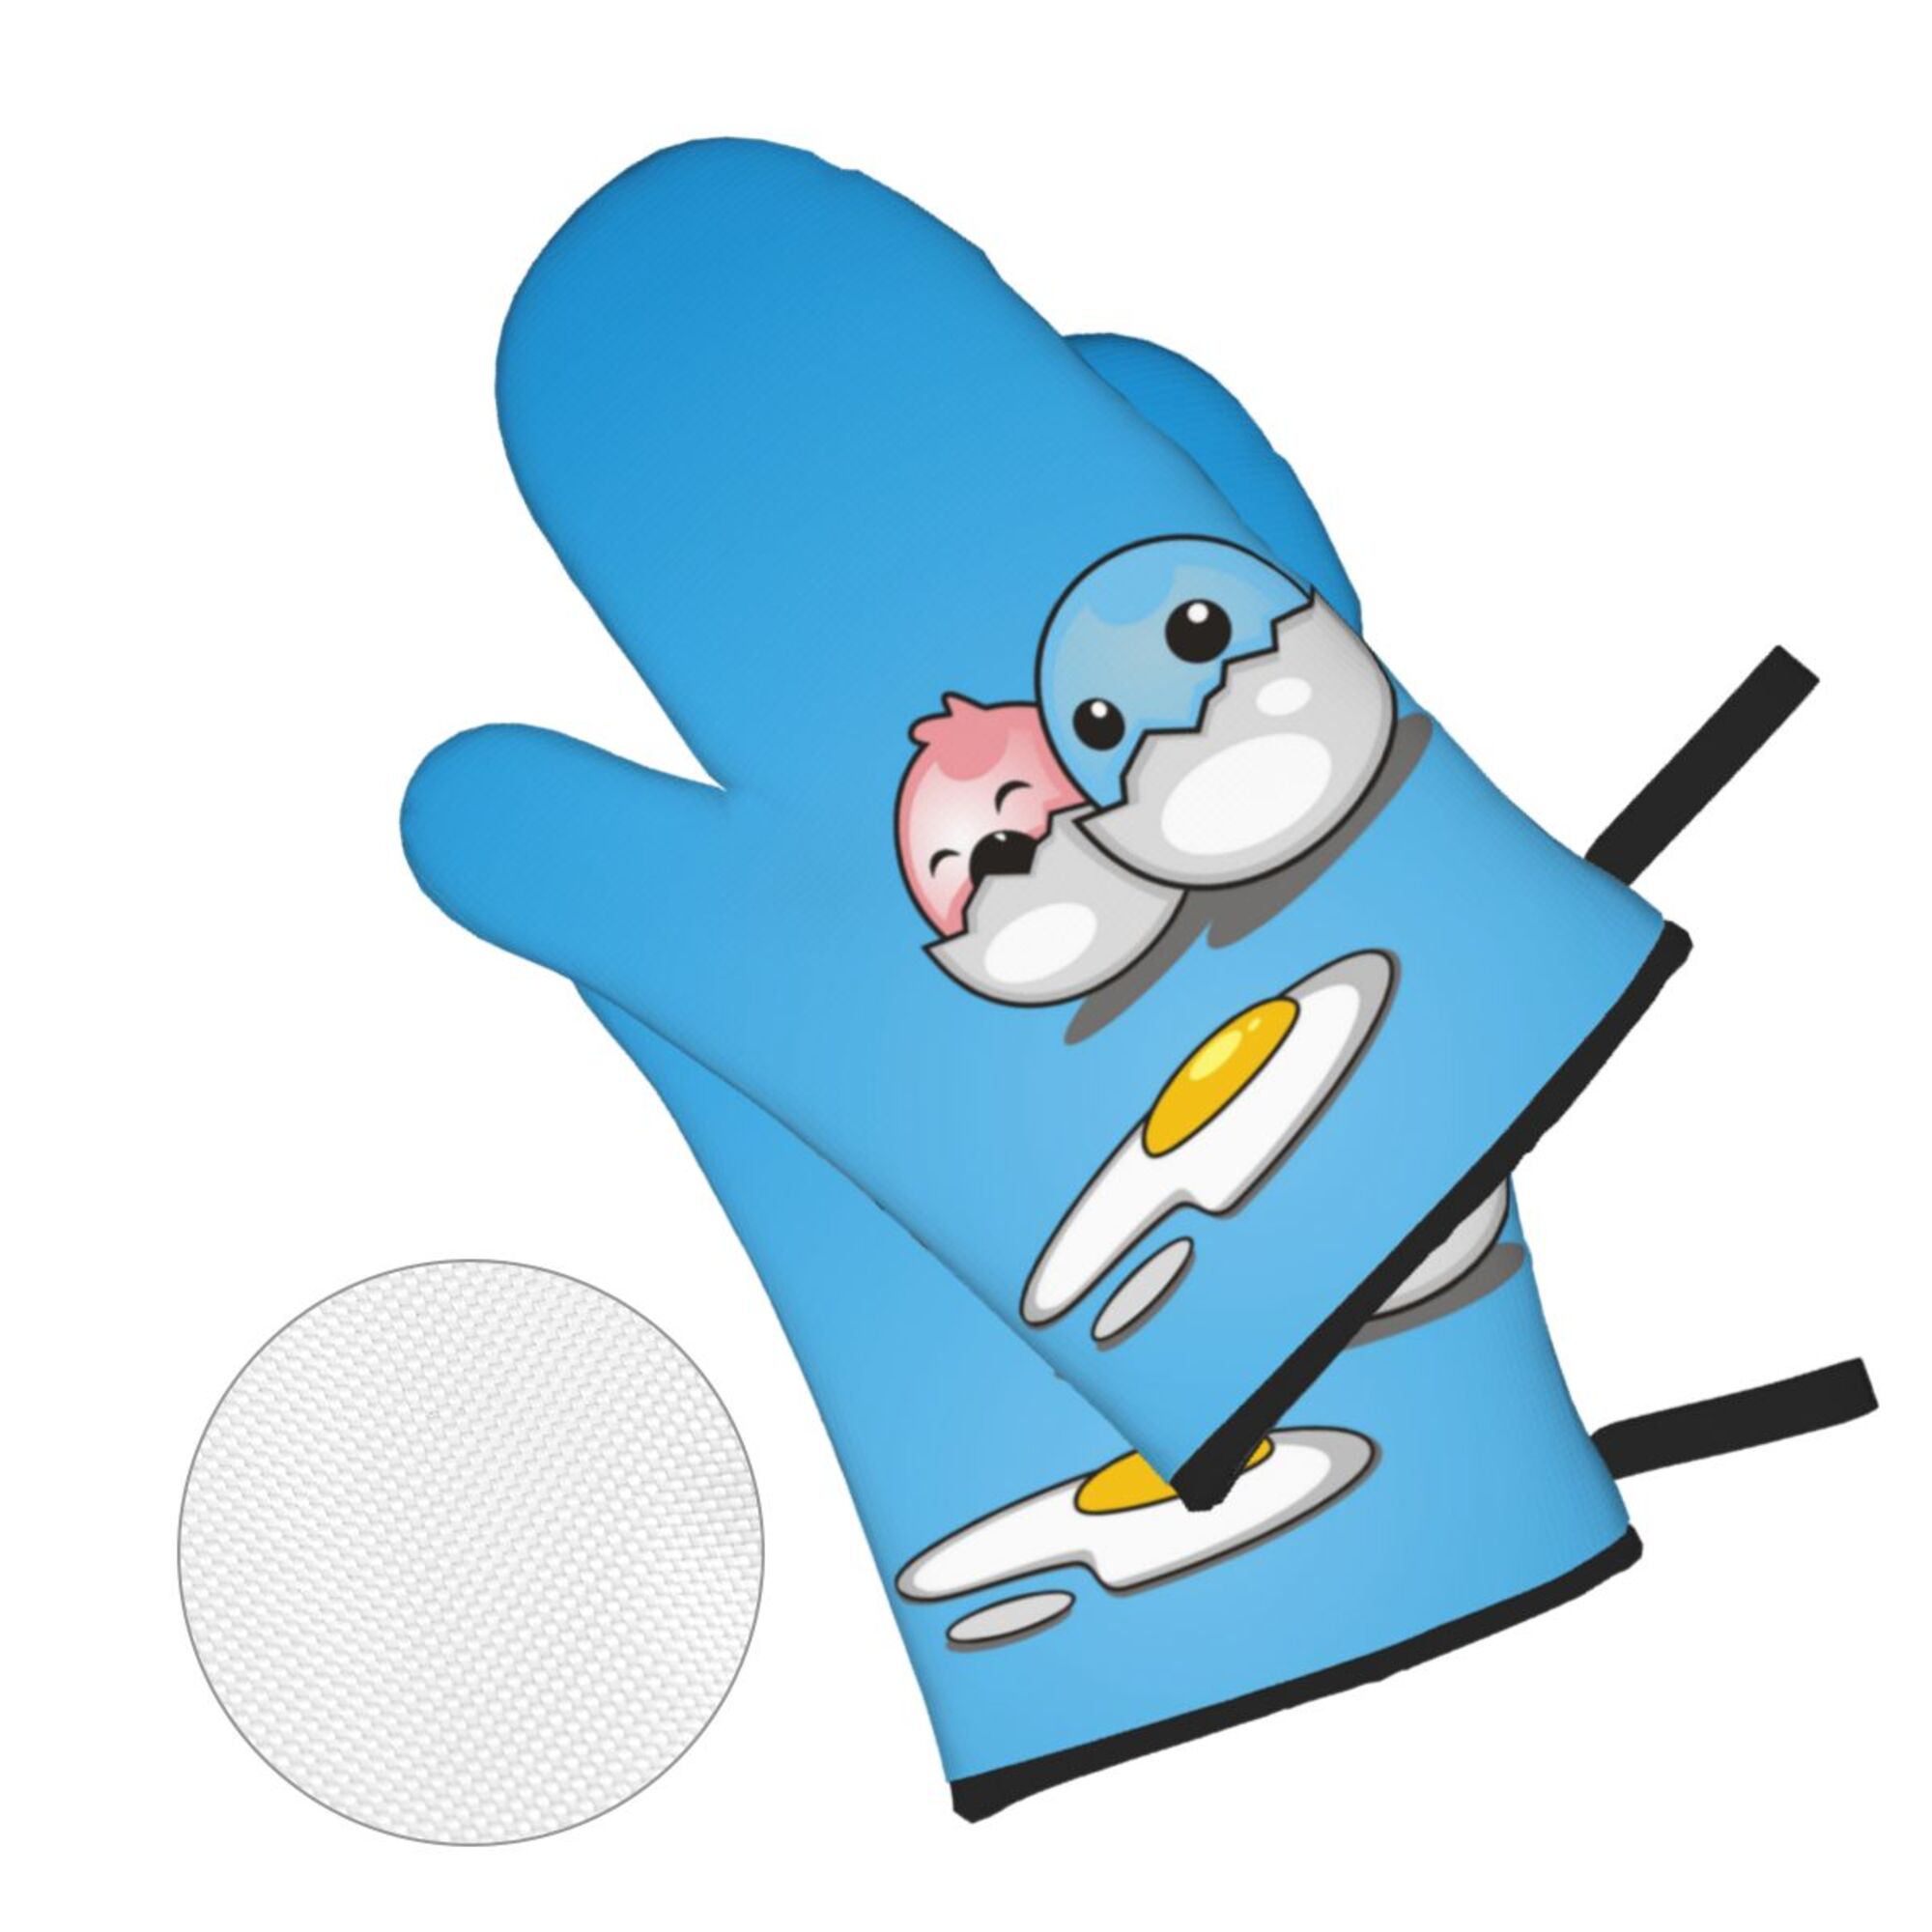 Funny Cute Blue Egg Oven Mitts and Pot Holders Sets Baking Sets for Kitchen Bbq Gloves Heat Resistant Cooking Cartoon Mascot 4 Pieces - image 2 of 8